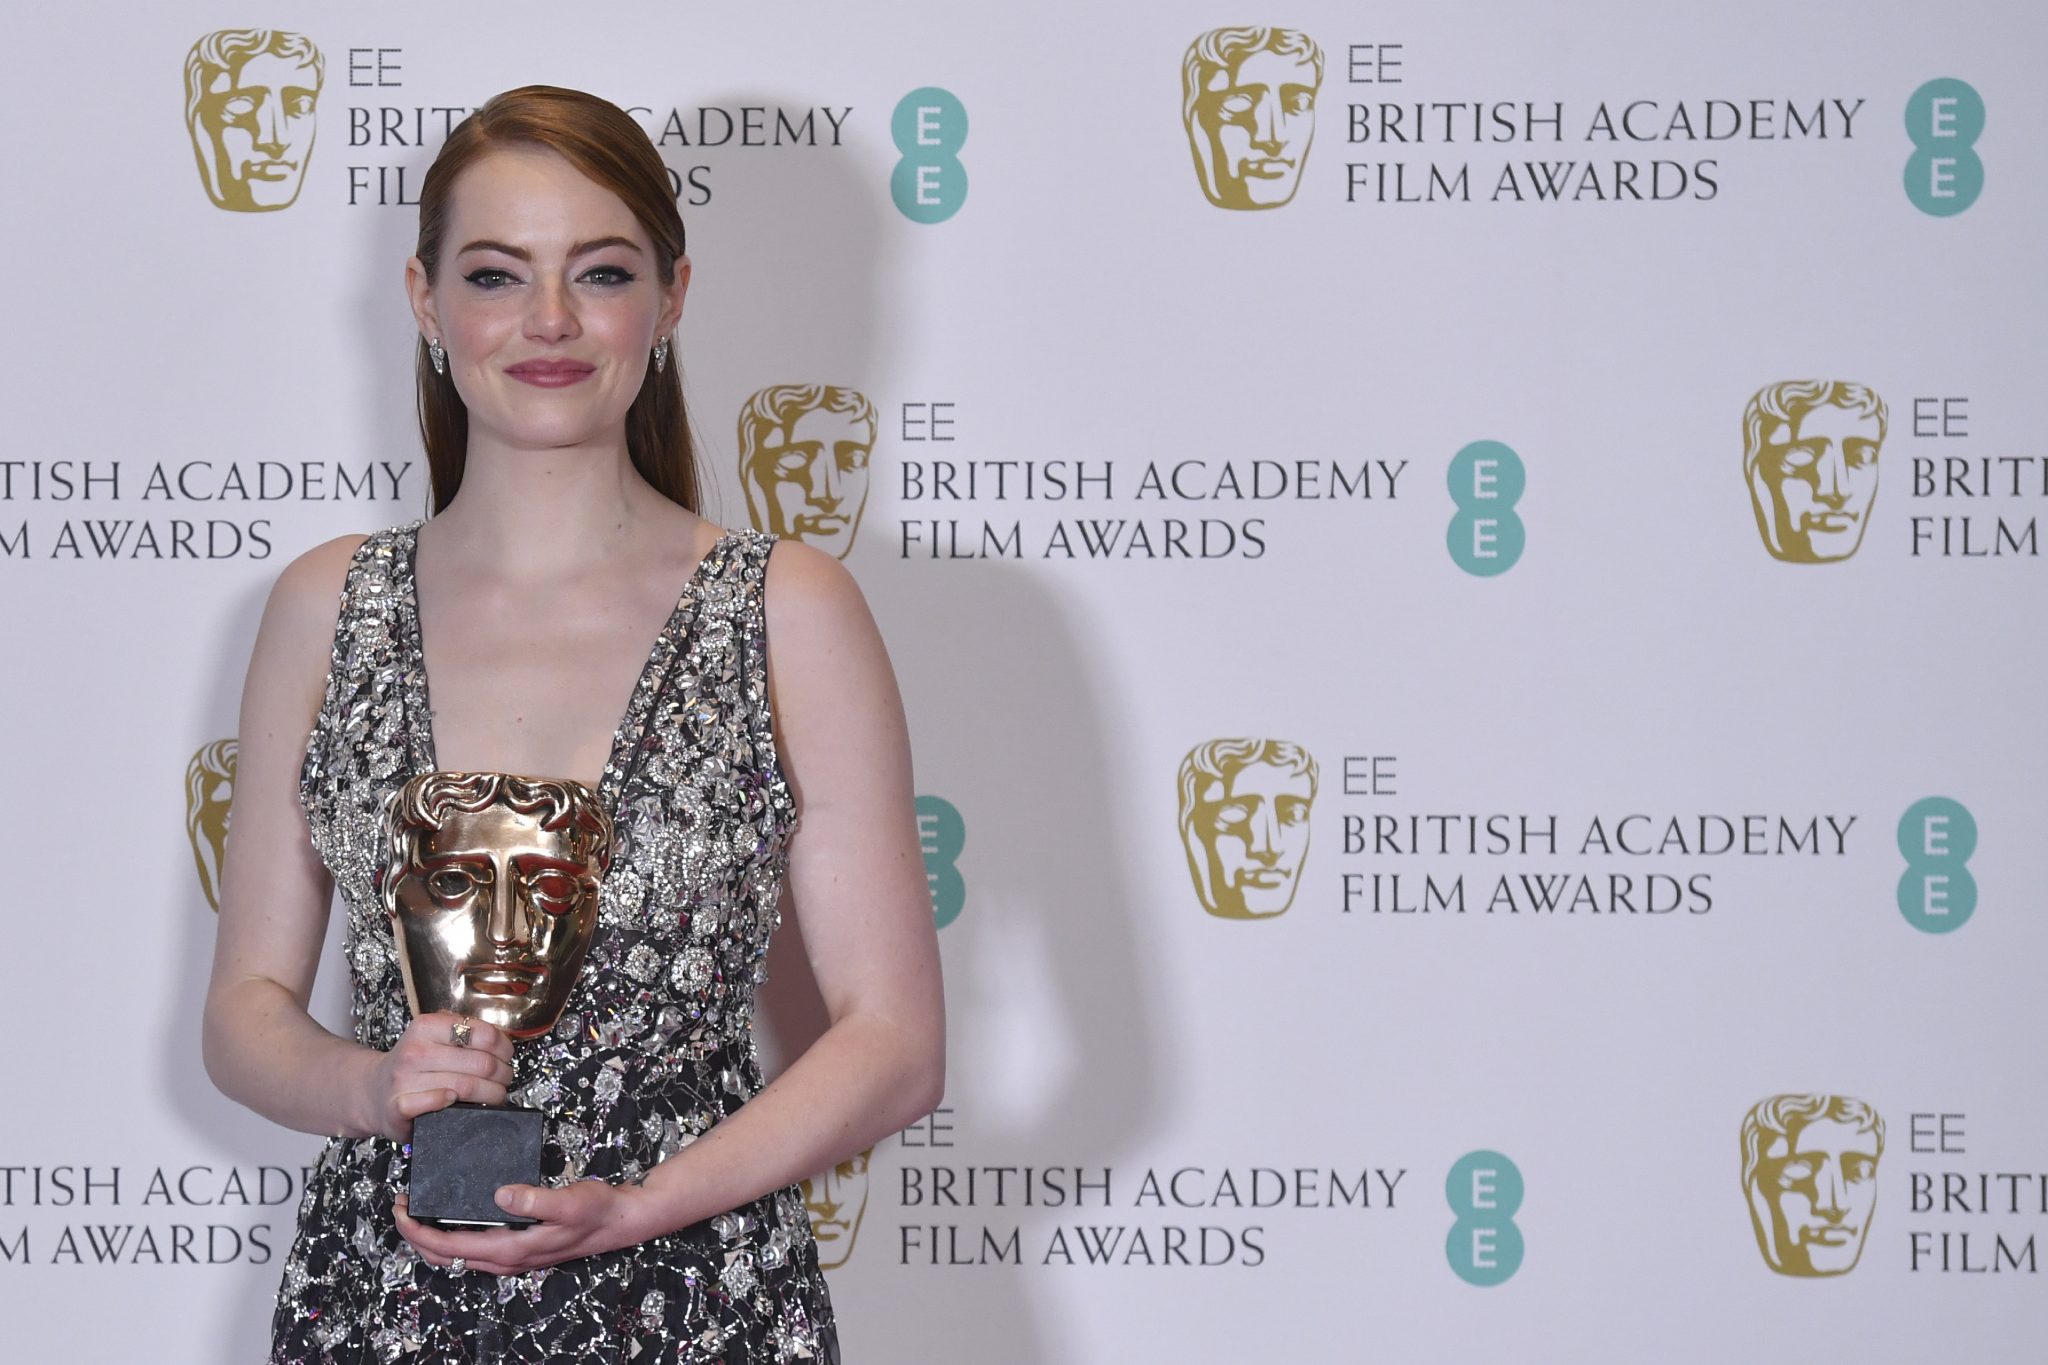 US actress Emma Stone poses with the award for a Leading Actress for her work on the film 'La La Land' at the BAFTA British Academy Film Awards at the Royal Albert Hall in London on February 12, 2017.  / AFP PHOTO / Ben STANSALL